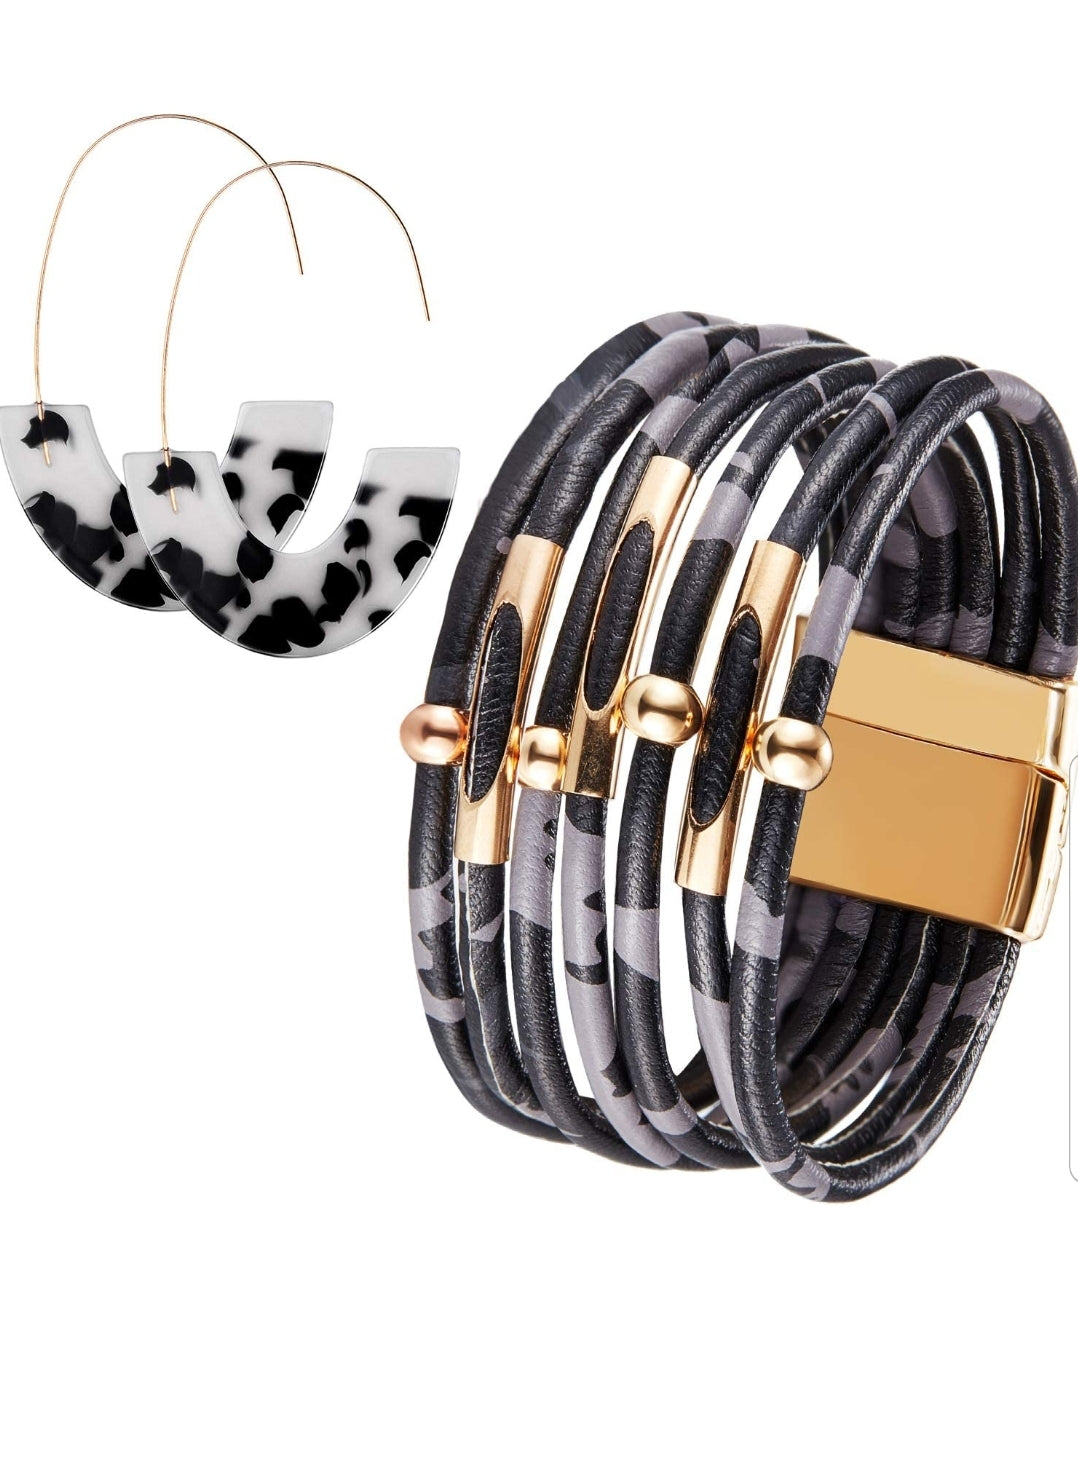 Leopard Magnetic Bracelet and Earring Set - Her Jewel•ry Box